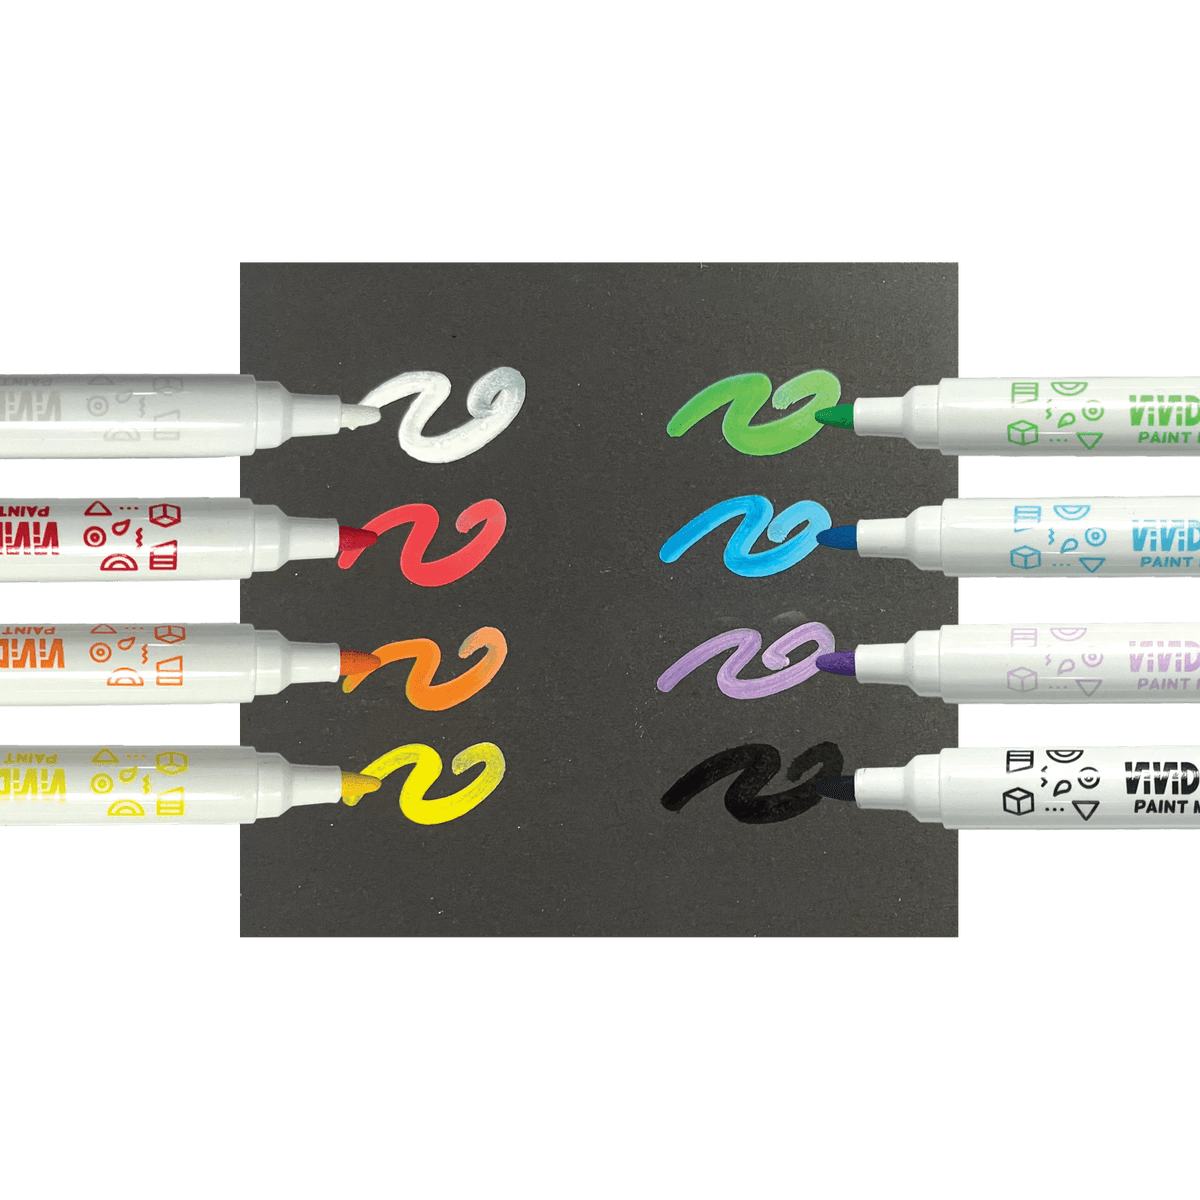 Vivid Pop! Water Based paint markers drawing color swatches